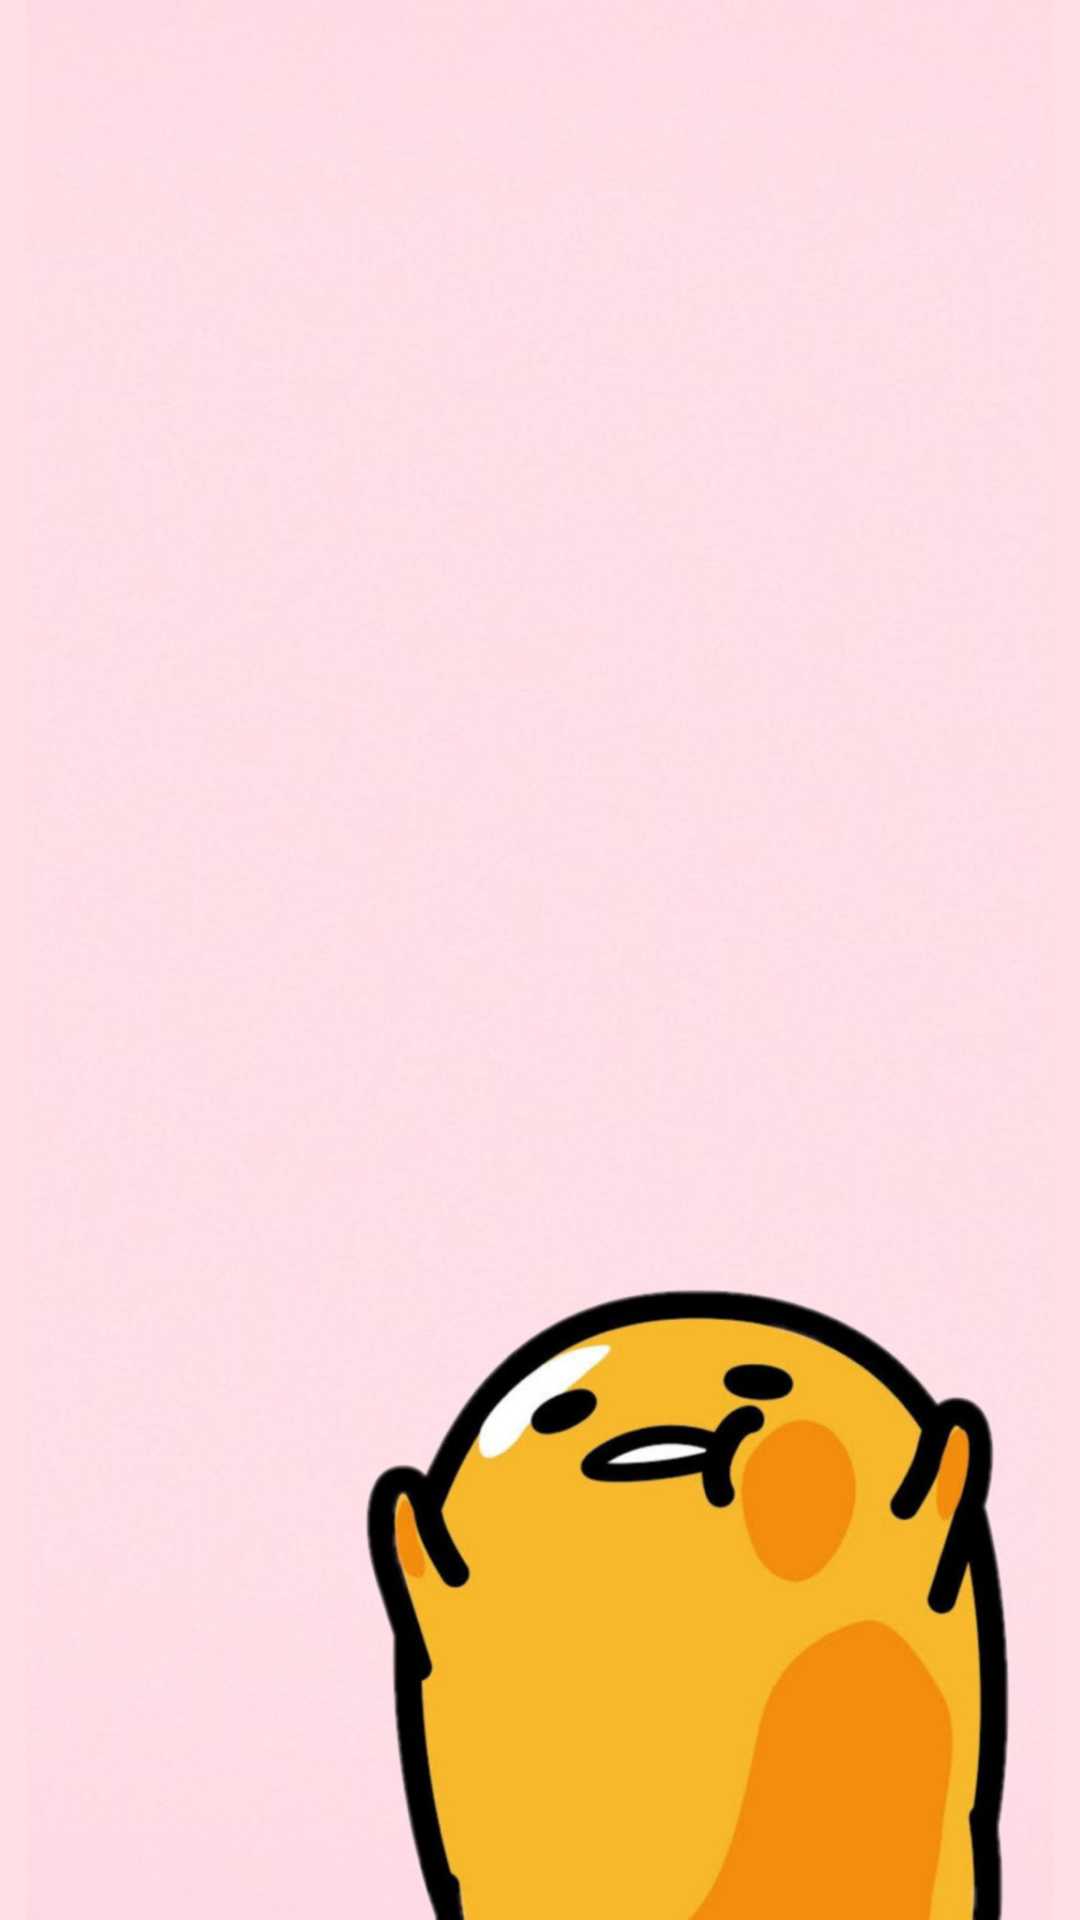 IPhone wallpaper with high-resolution 1080x1920 pixel. You can use this wallpaper for your iPhone 5, 6, 7, 8, X, XS, XR backgrounds, Mobile Screensaver, or iPad Lock Screen - Gudetama